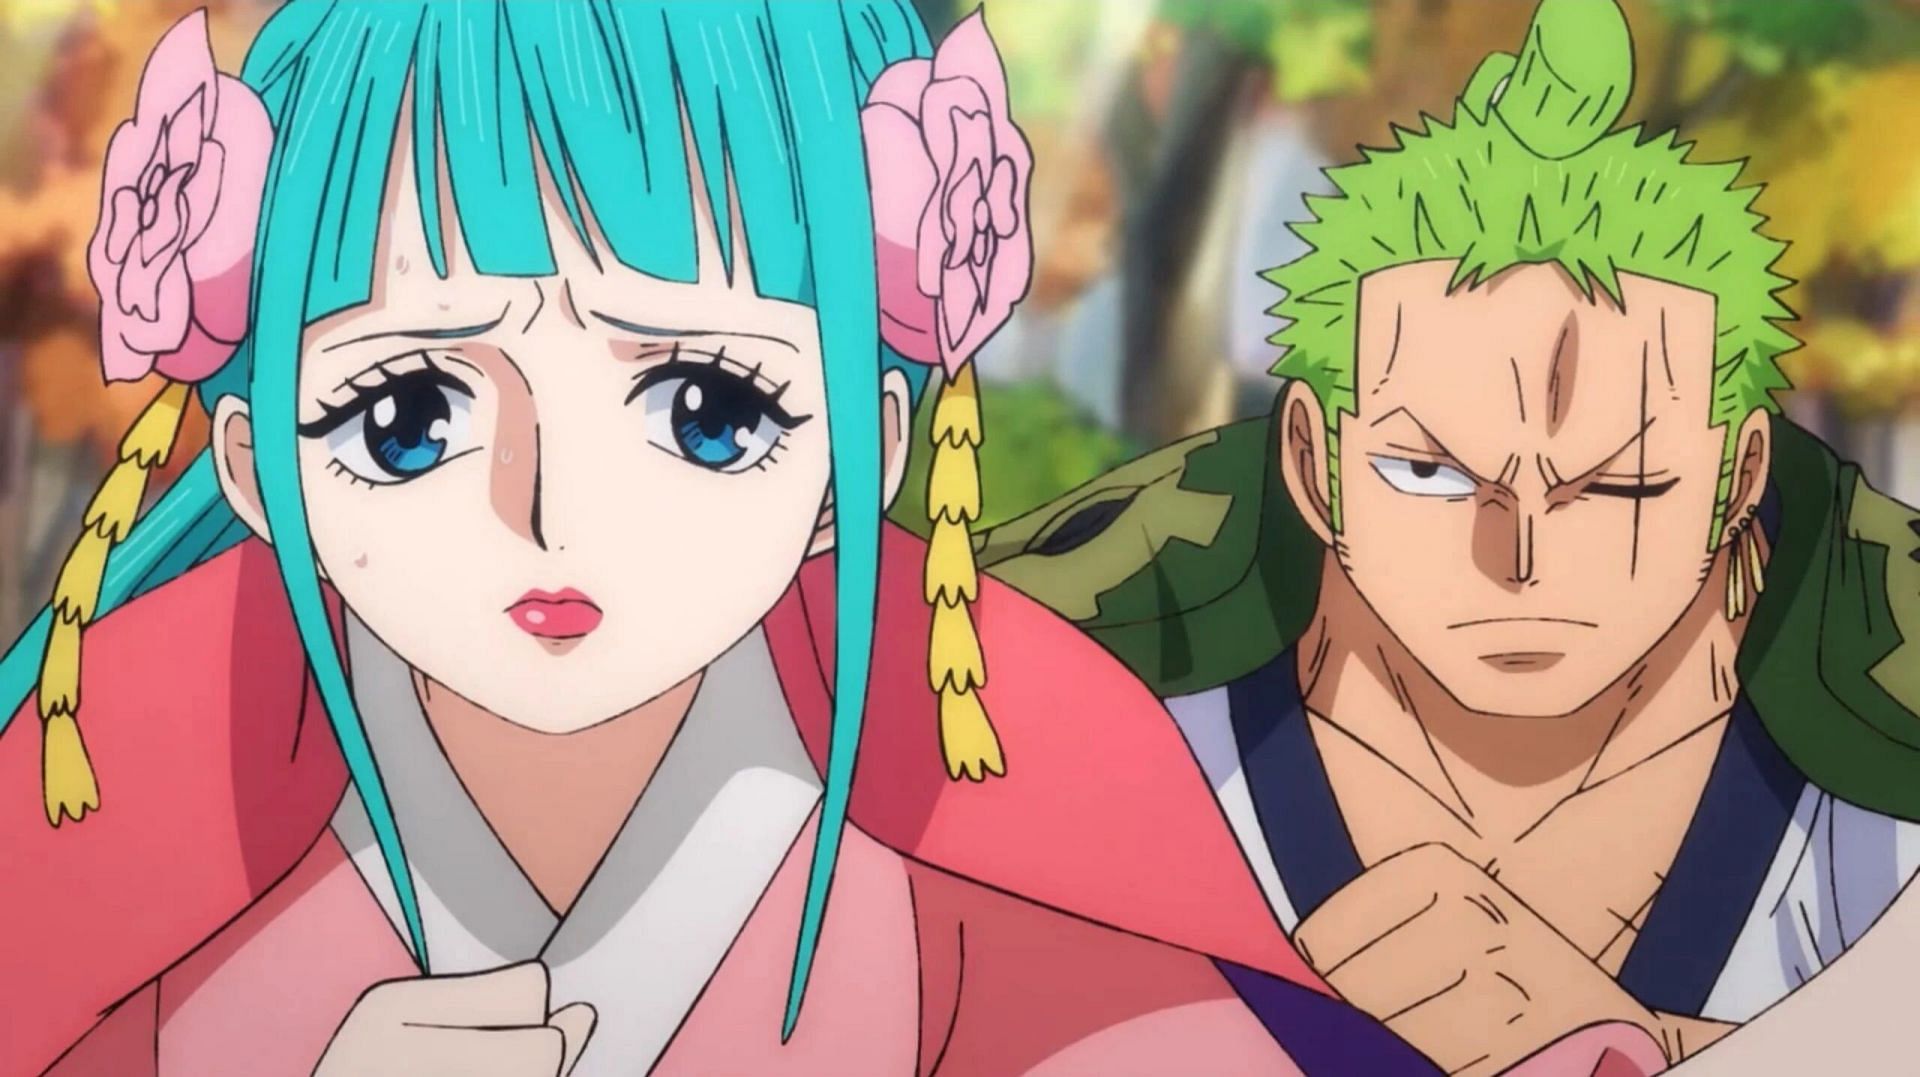 One Piece episode 1084 could have a new scene for Zoro and Hiyori (Image Toei Animation).